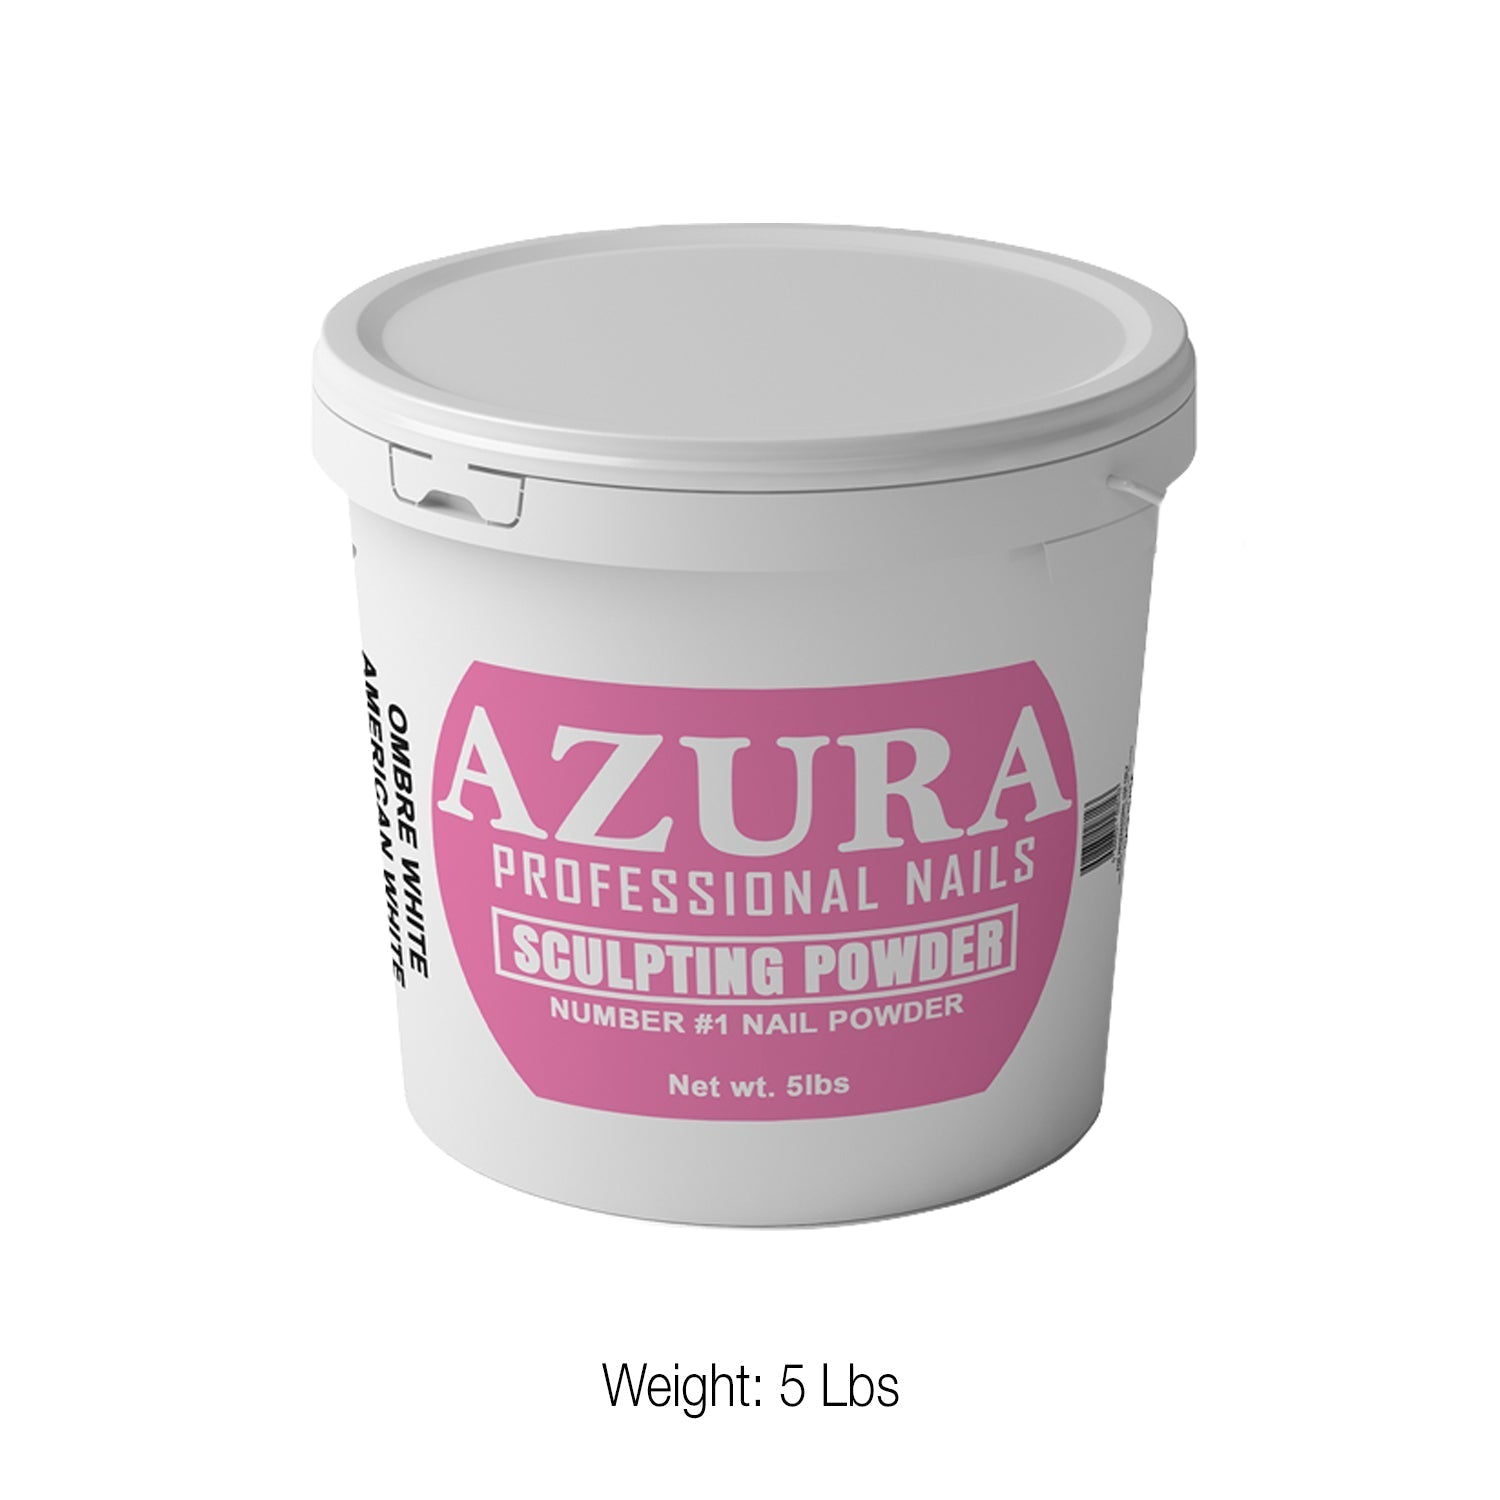 AZURA Sculpting Powder (5lbs) - (Natural Mix / Crystal Clear / Ombre White)-powder-Nails Deal & Beauty Supply-OMBRE WHITE- Nail Supply American Gel Polish - Phuong Ni